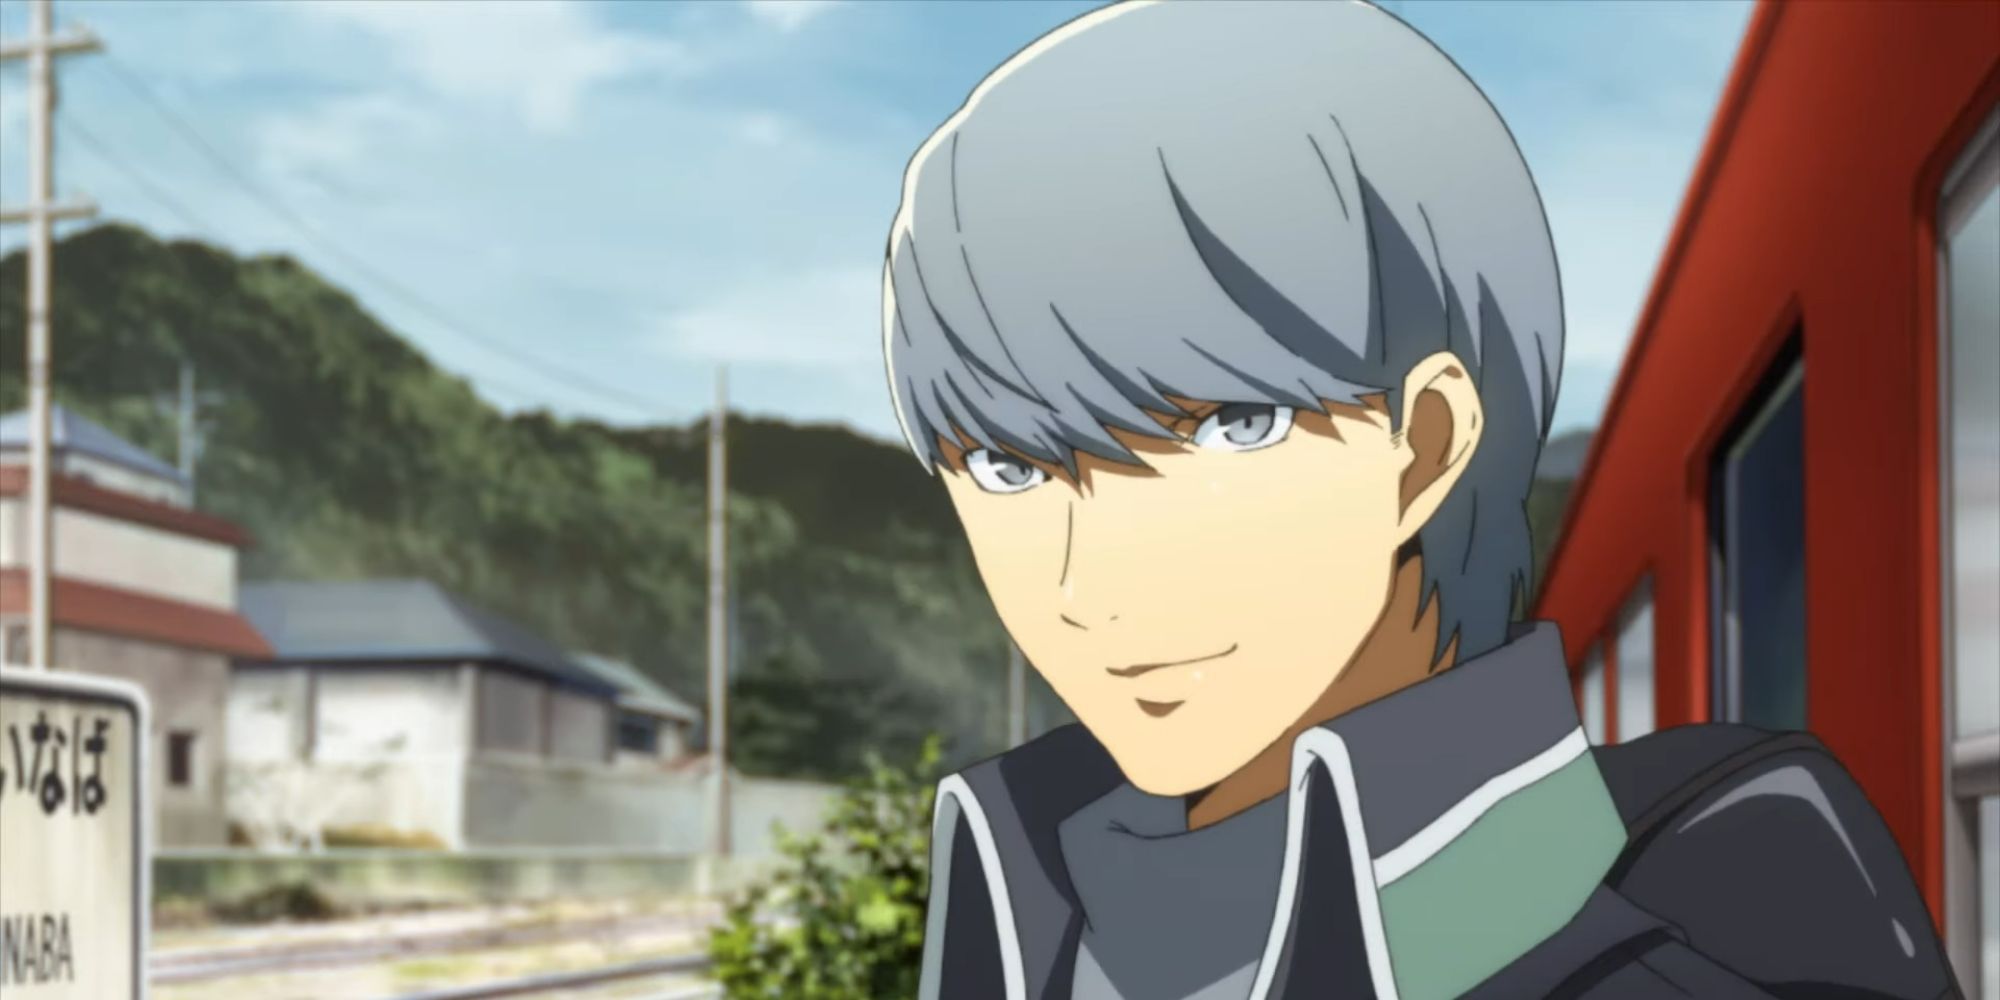 Closeup of a character from Persona 4 the Golden Animation